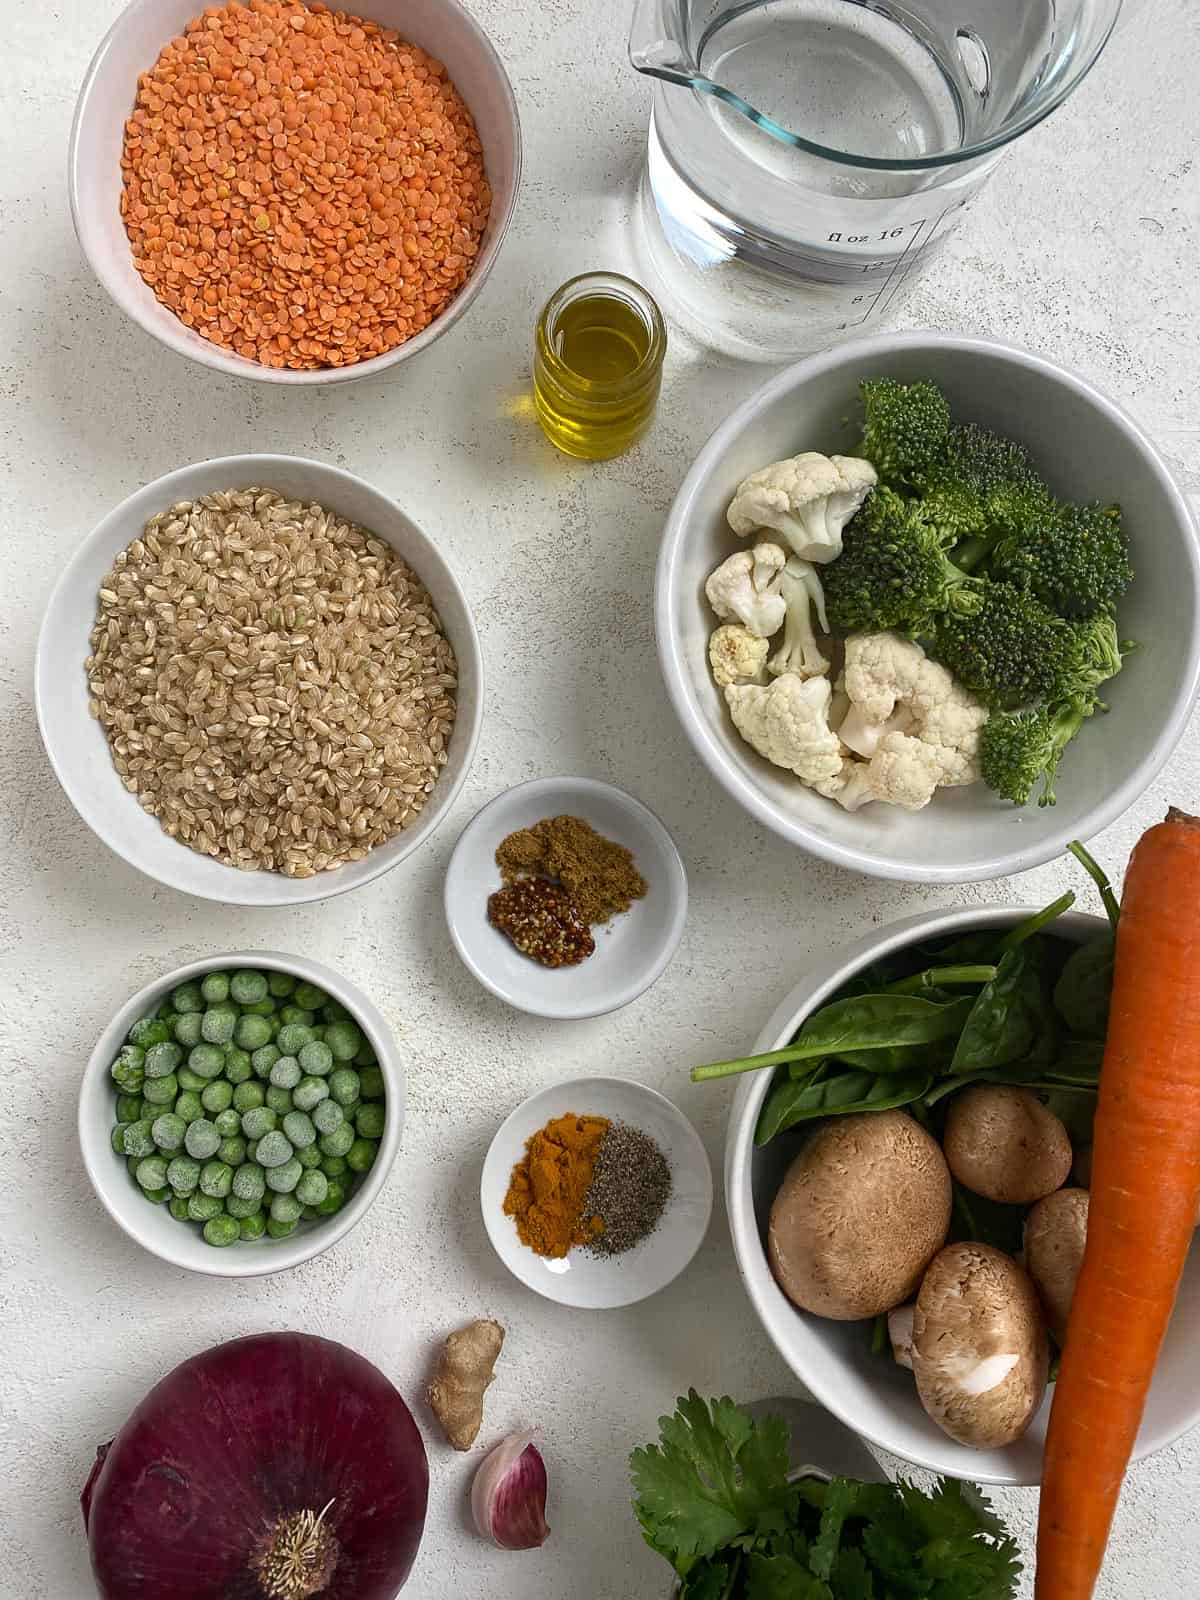 Ingredients for kichari lentil patties measured against a white background